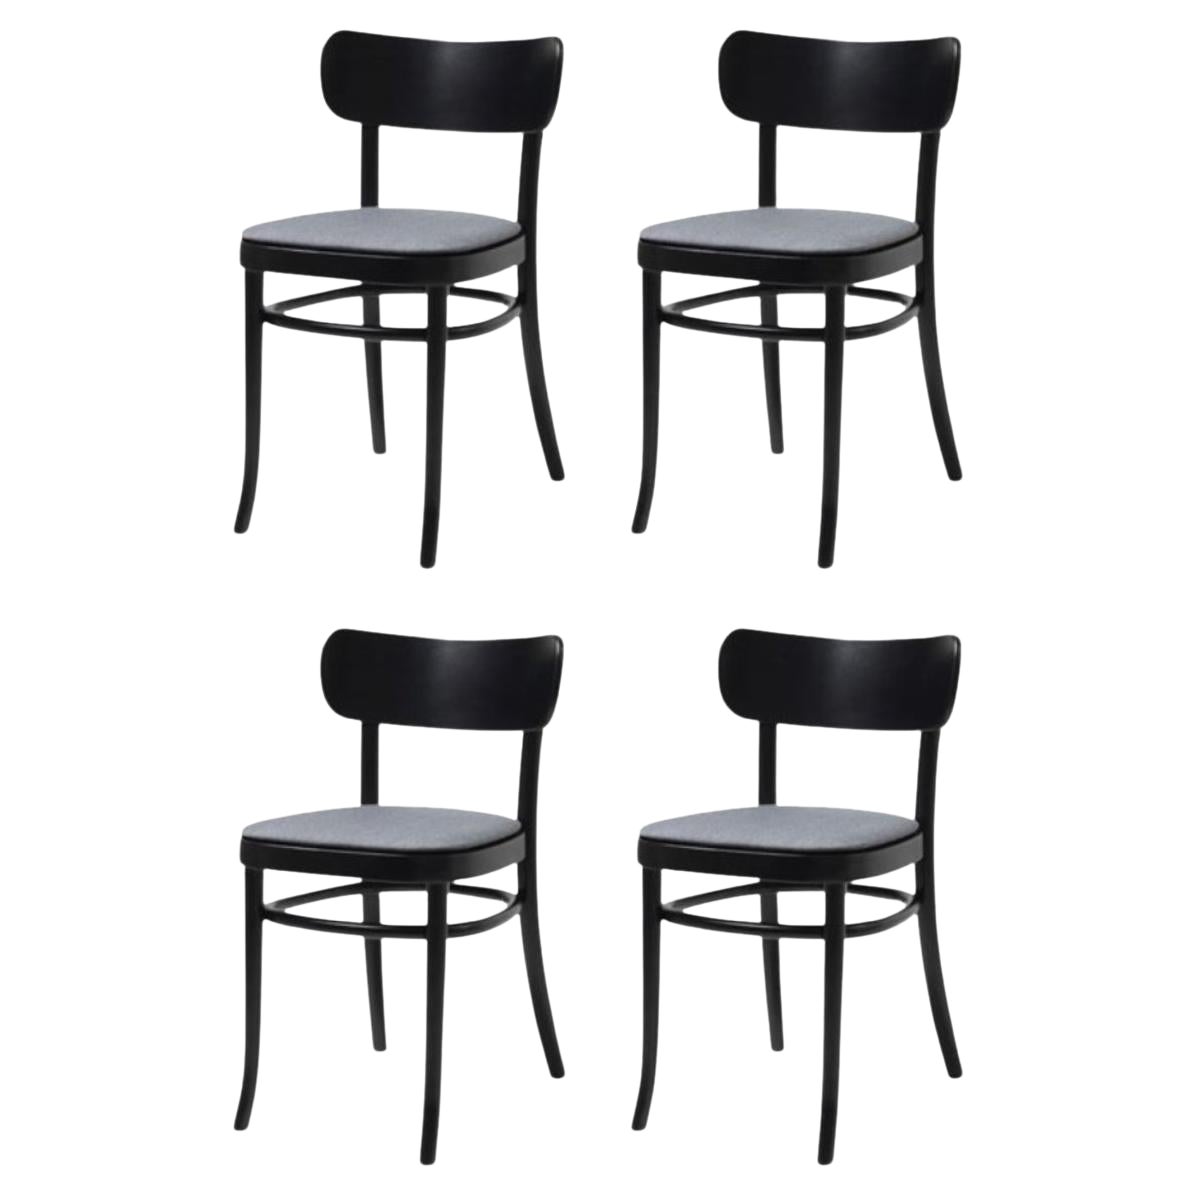 Set of 4 MZO Chairs by Mazo Design